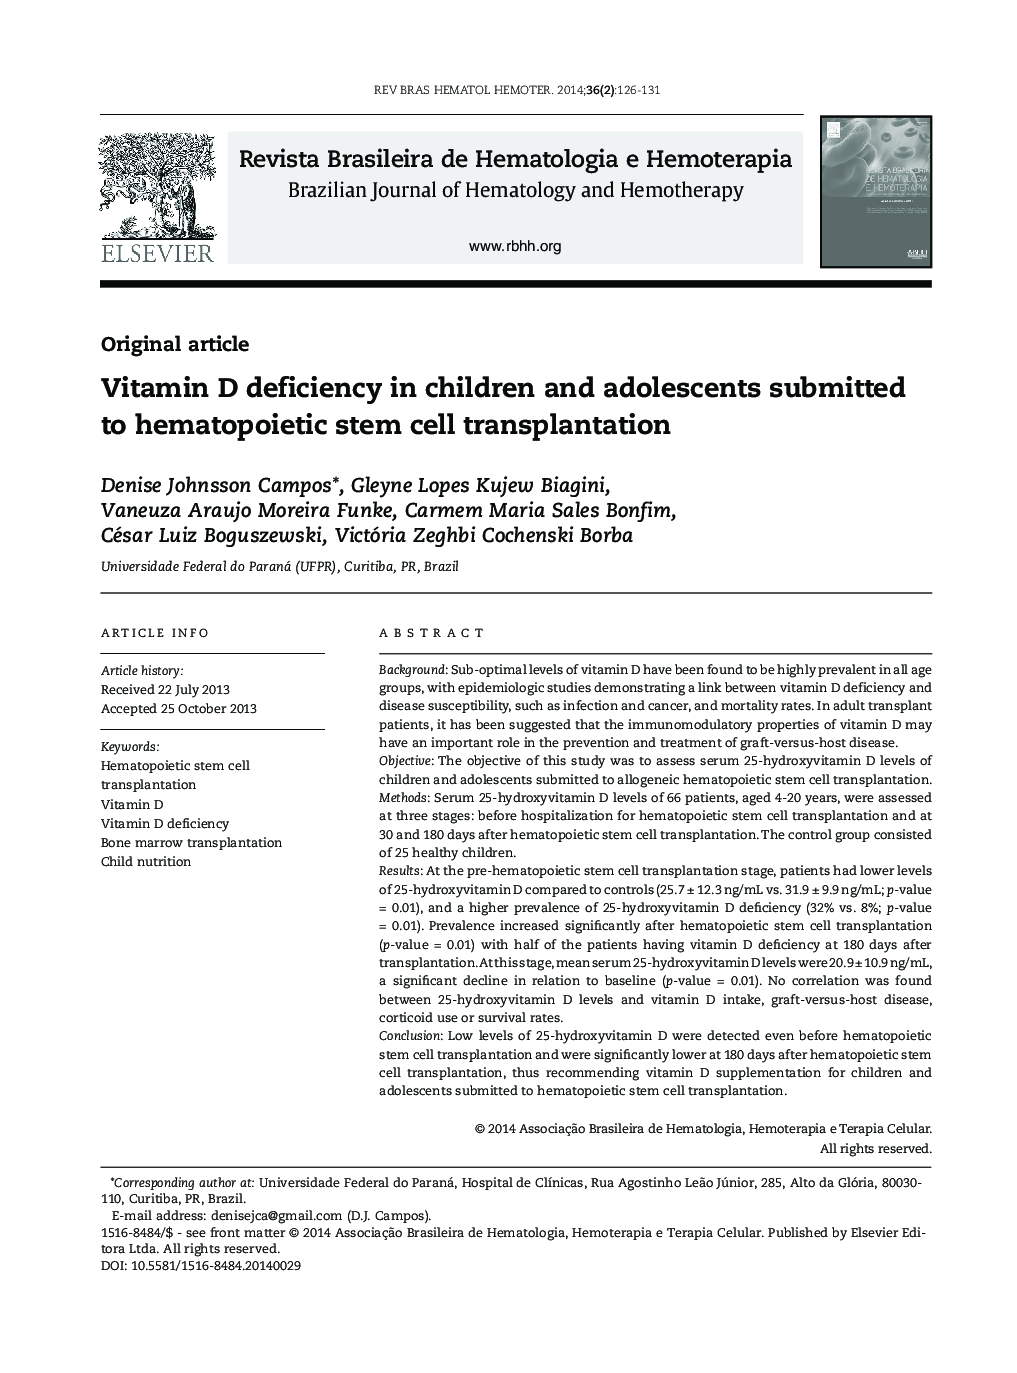 Vitamin D deficiency in children and adolescents submitted to hematopoietic stem cell transplantation